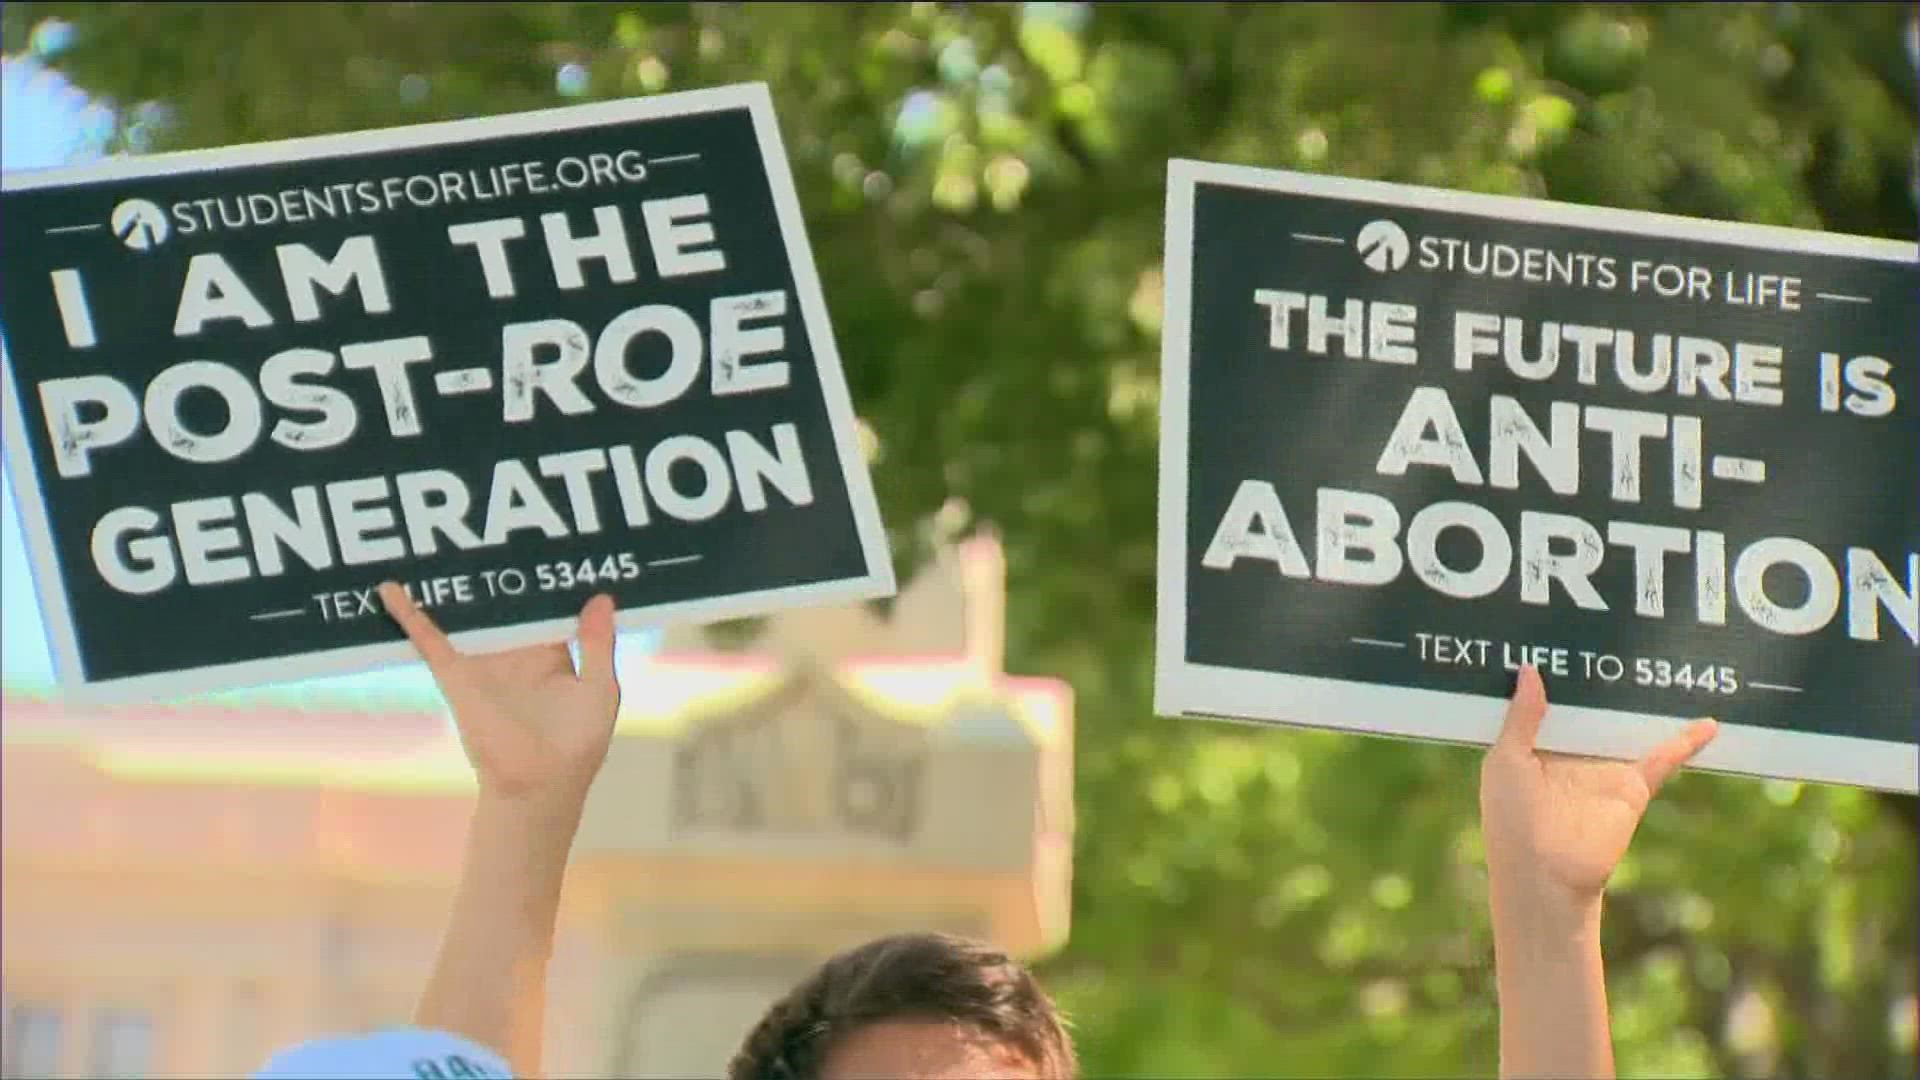 The rally celebrating the decision to overturn Roe v. Wade was organized by the Texas Right to Life organization.